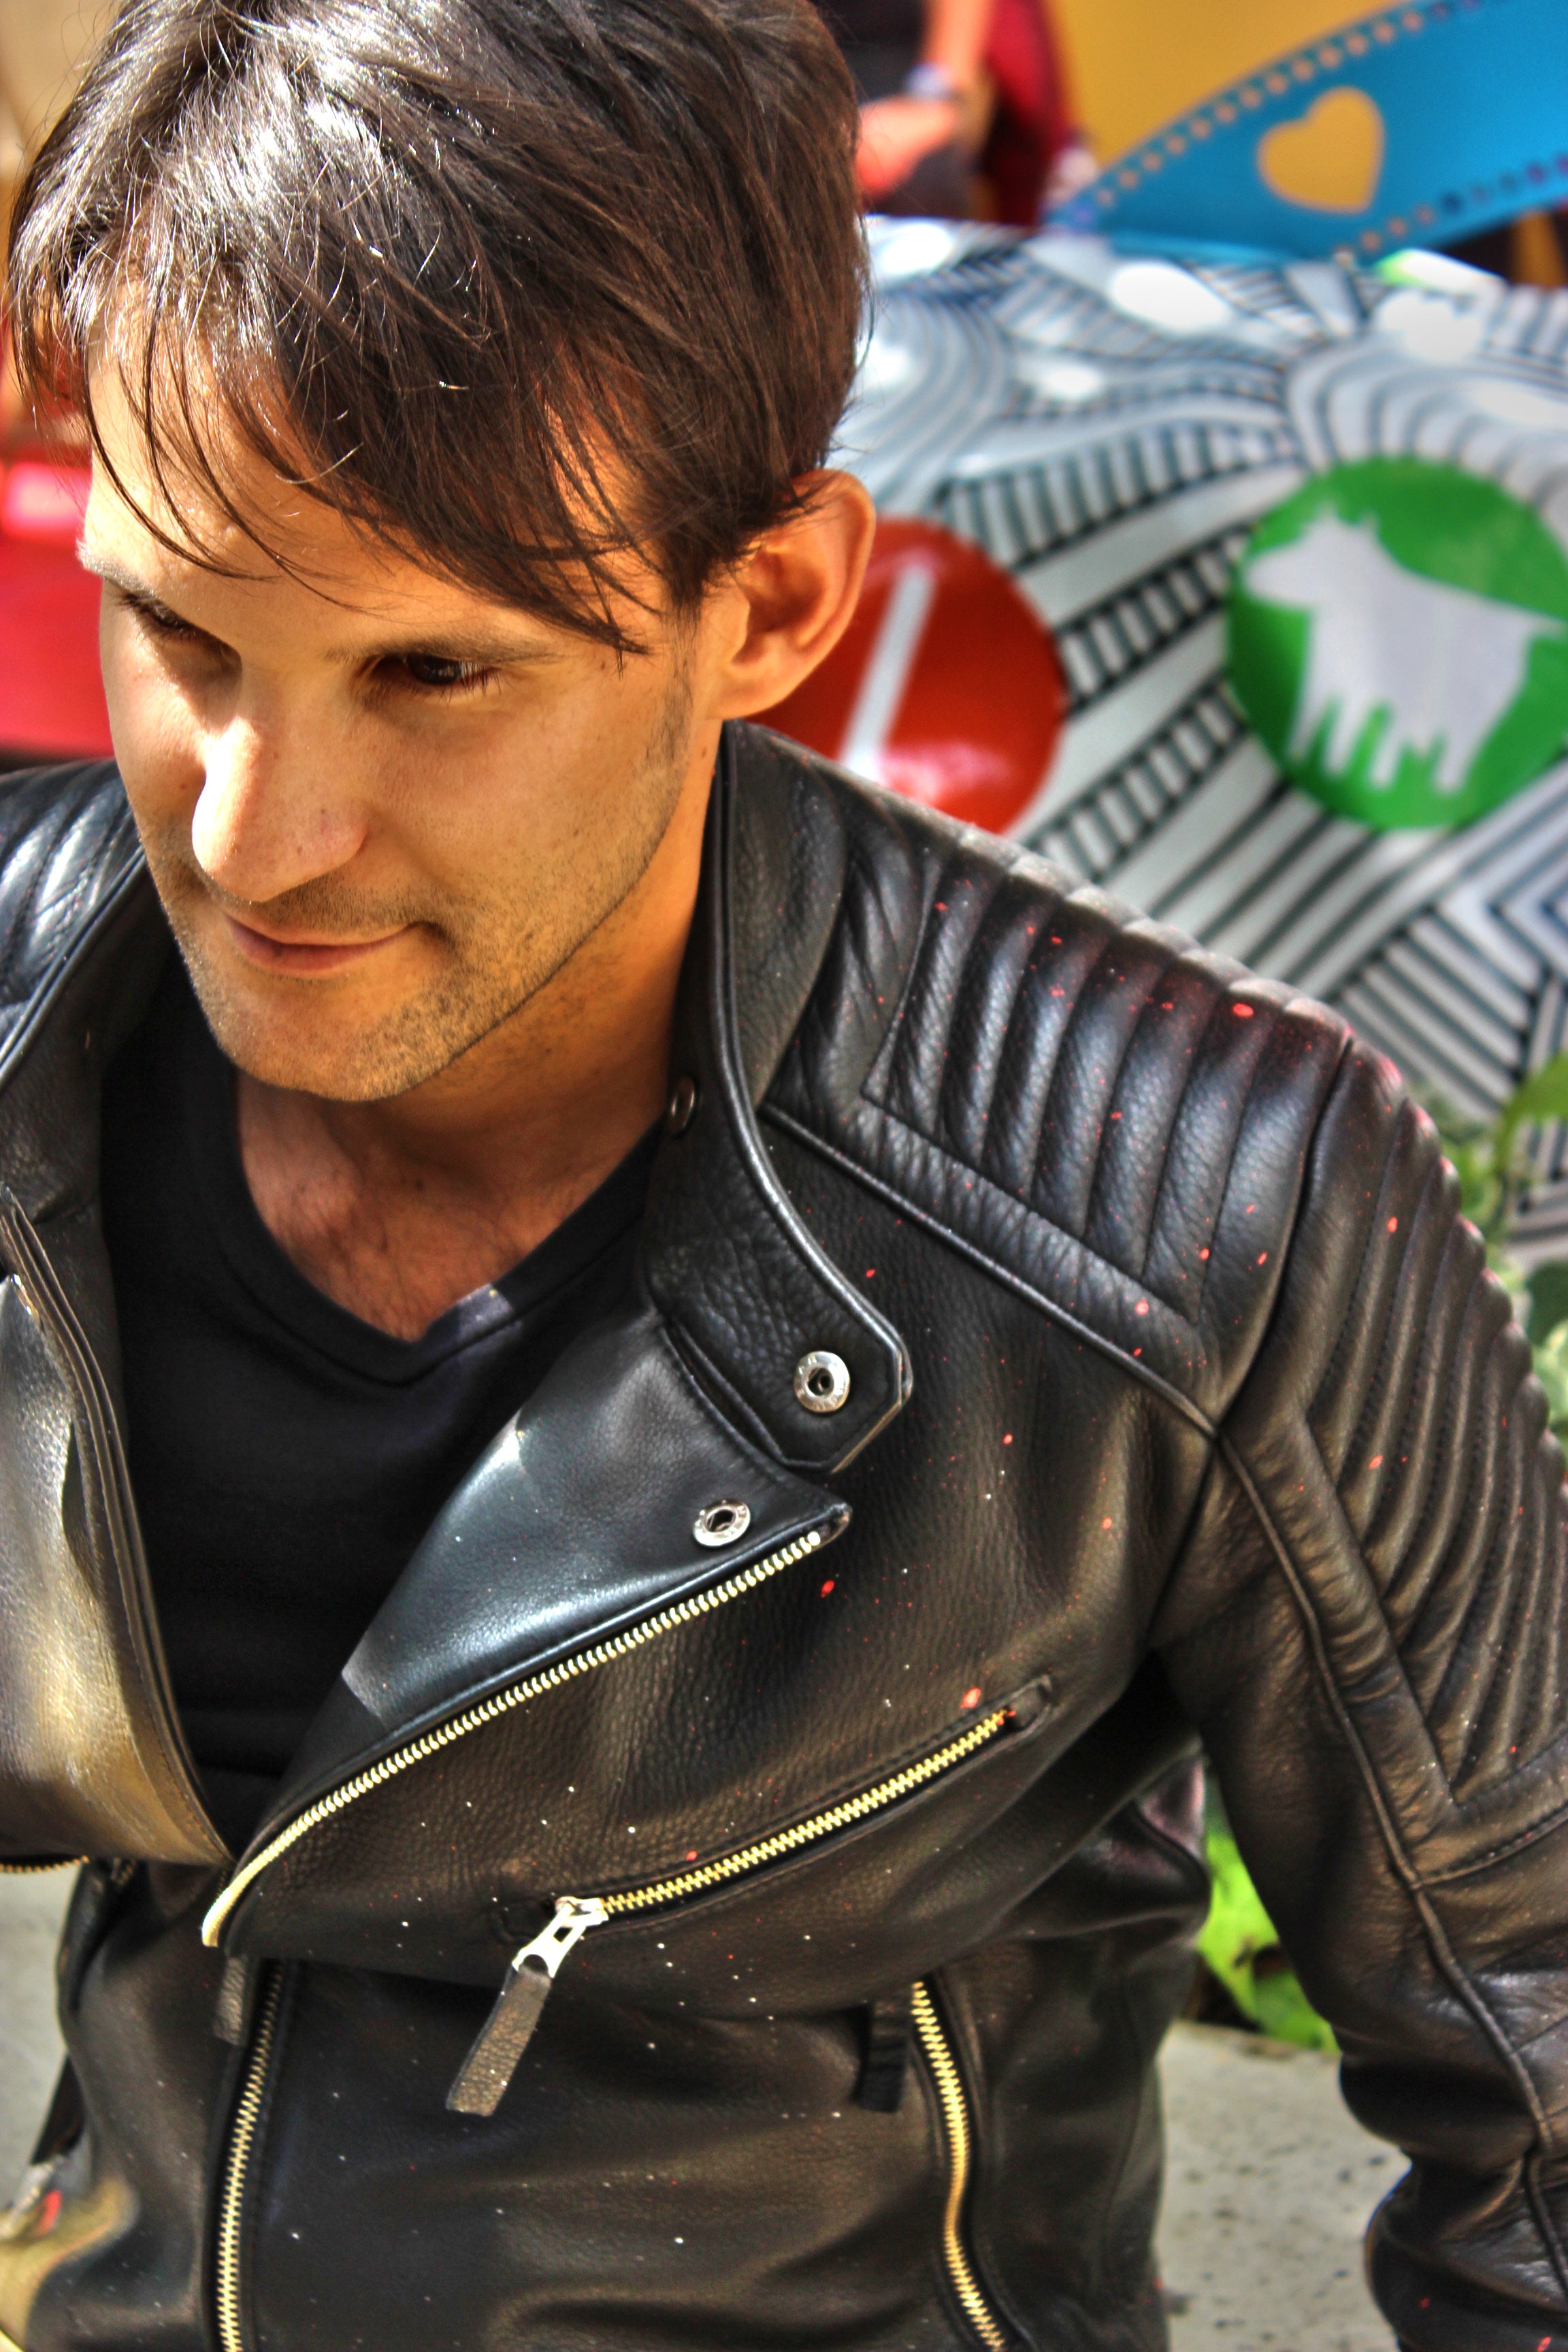 L.A. Leather Jacket Hand Limited - PDCollection Online Black - Shop Edition– Painted - Cafe Racer Leatherwear